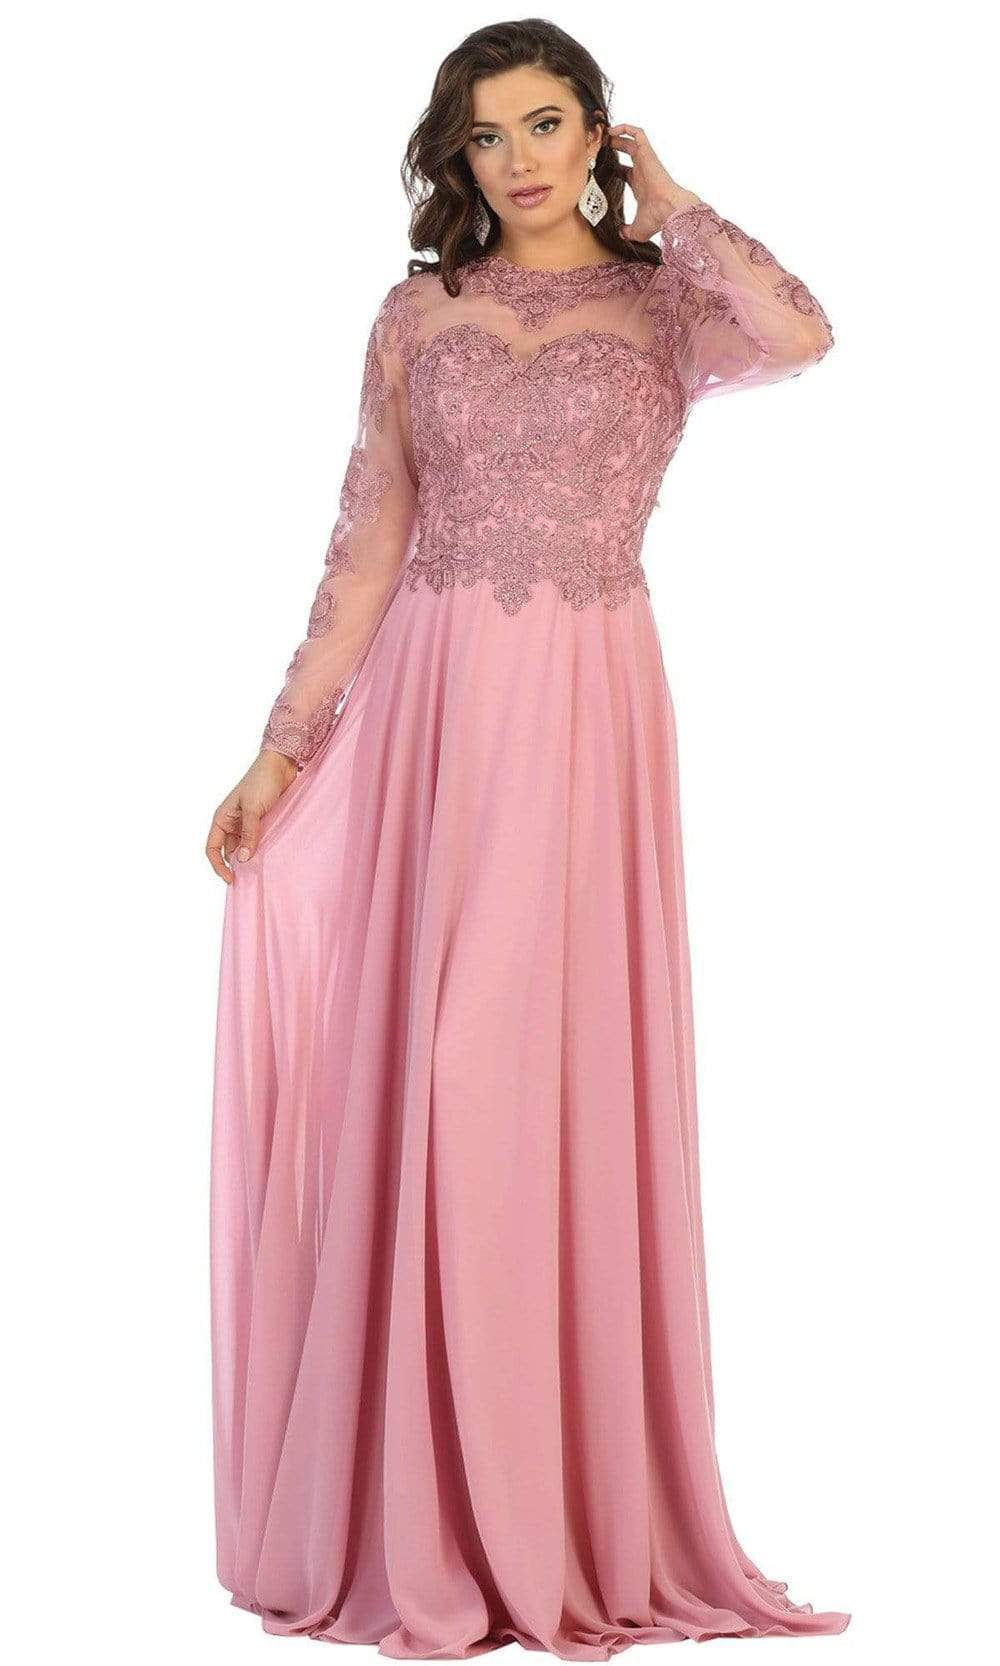 May Queen - RQ7732 Embroidered Long Sleeve Bateau A-line Dress Special Occasion Dress M / Dusty-Rose